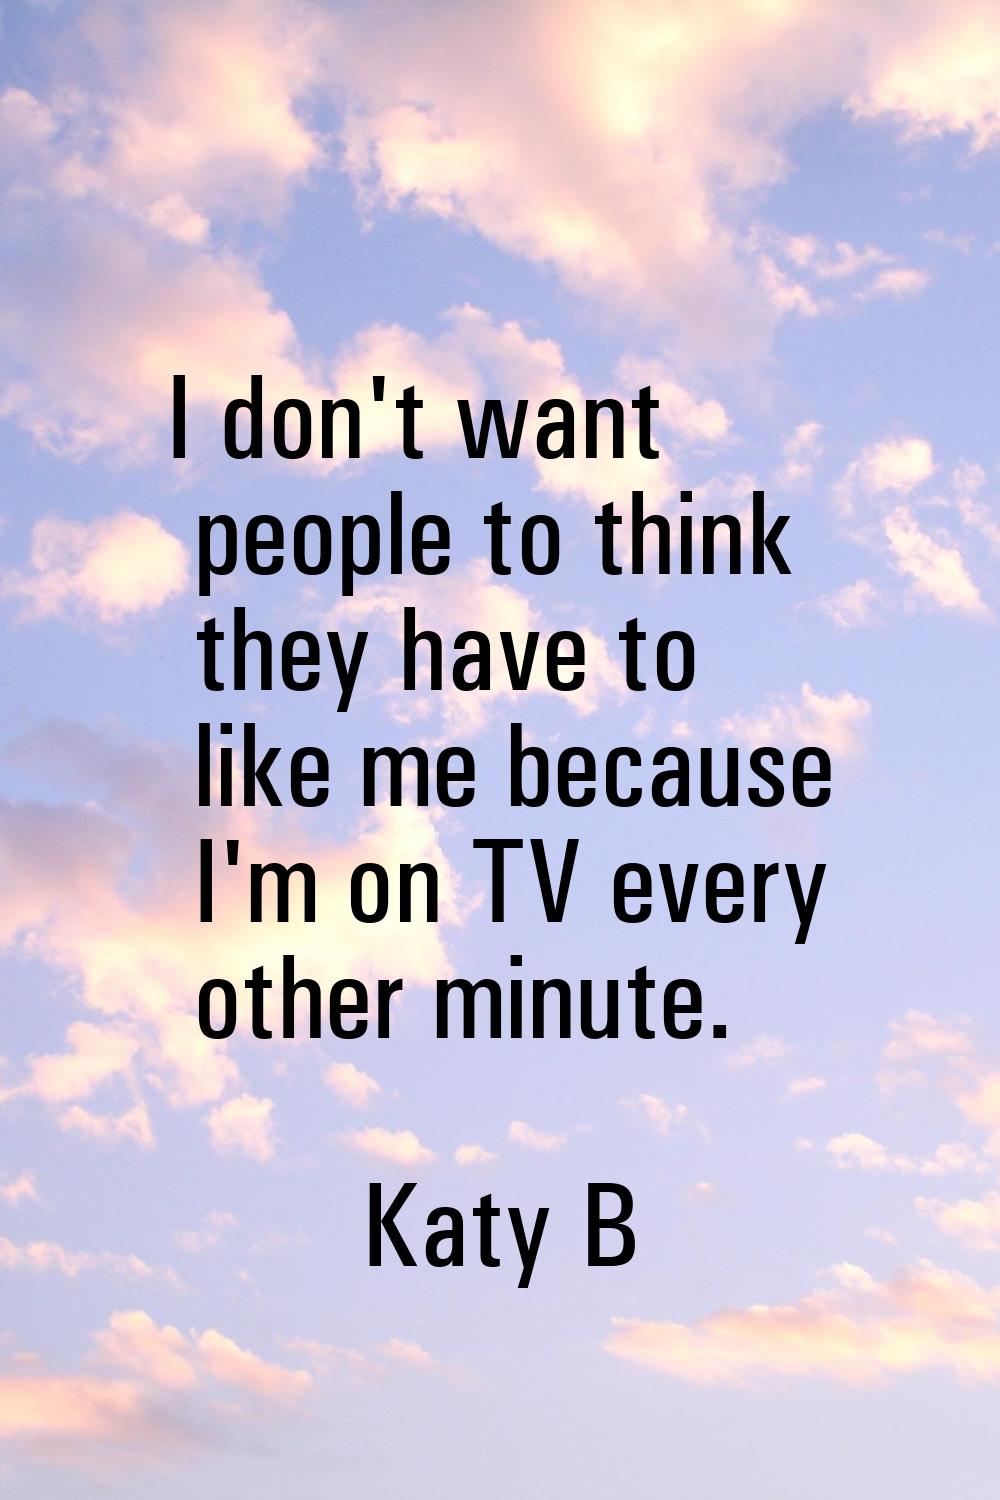 I don't want people to think they have to like me because I'm on TV every other minute.